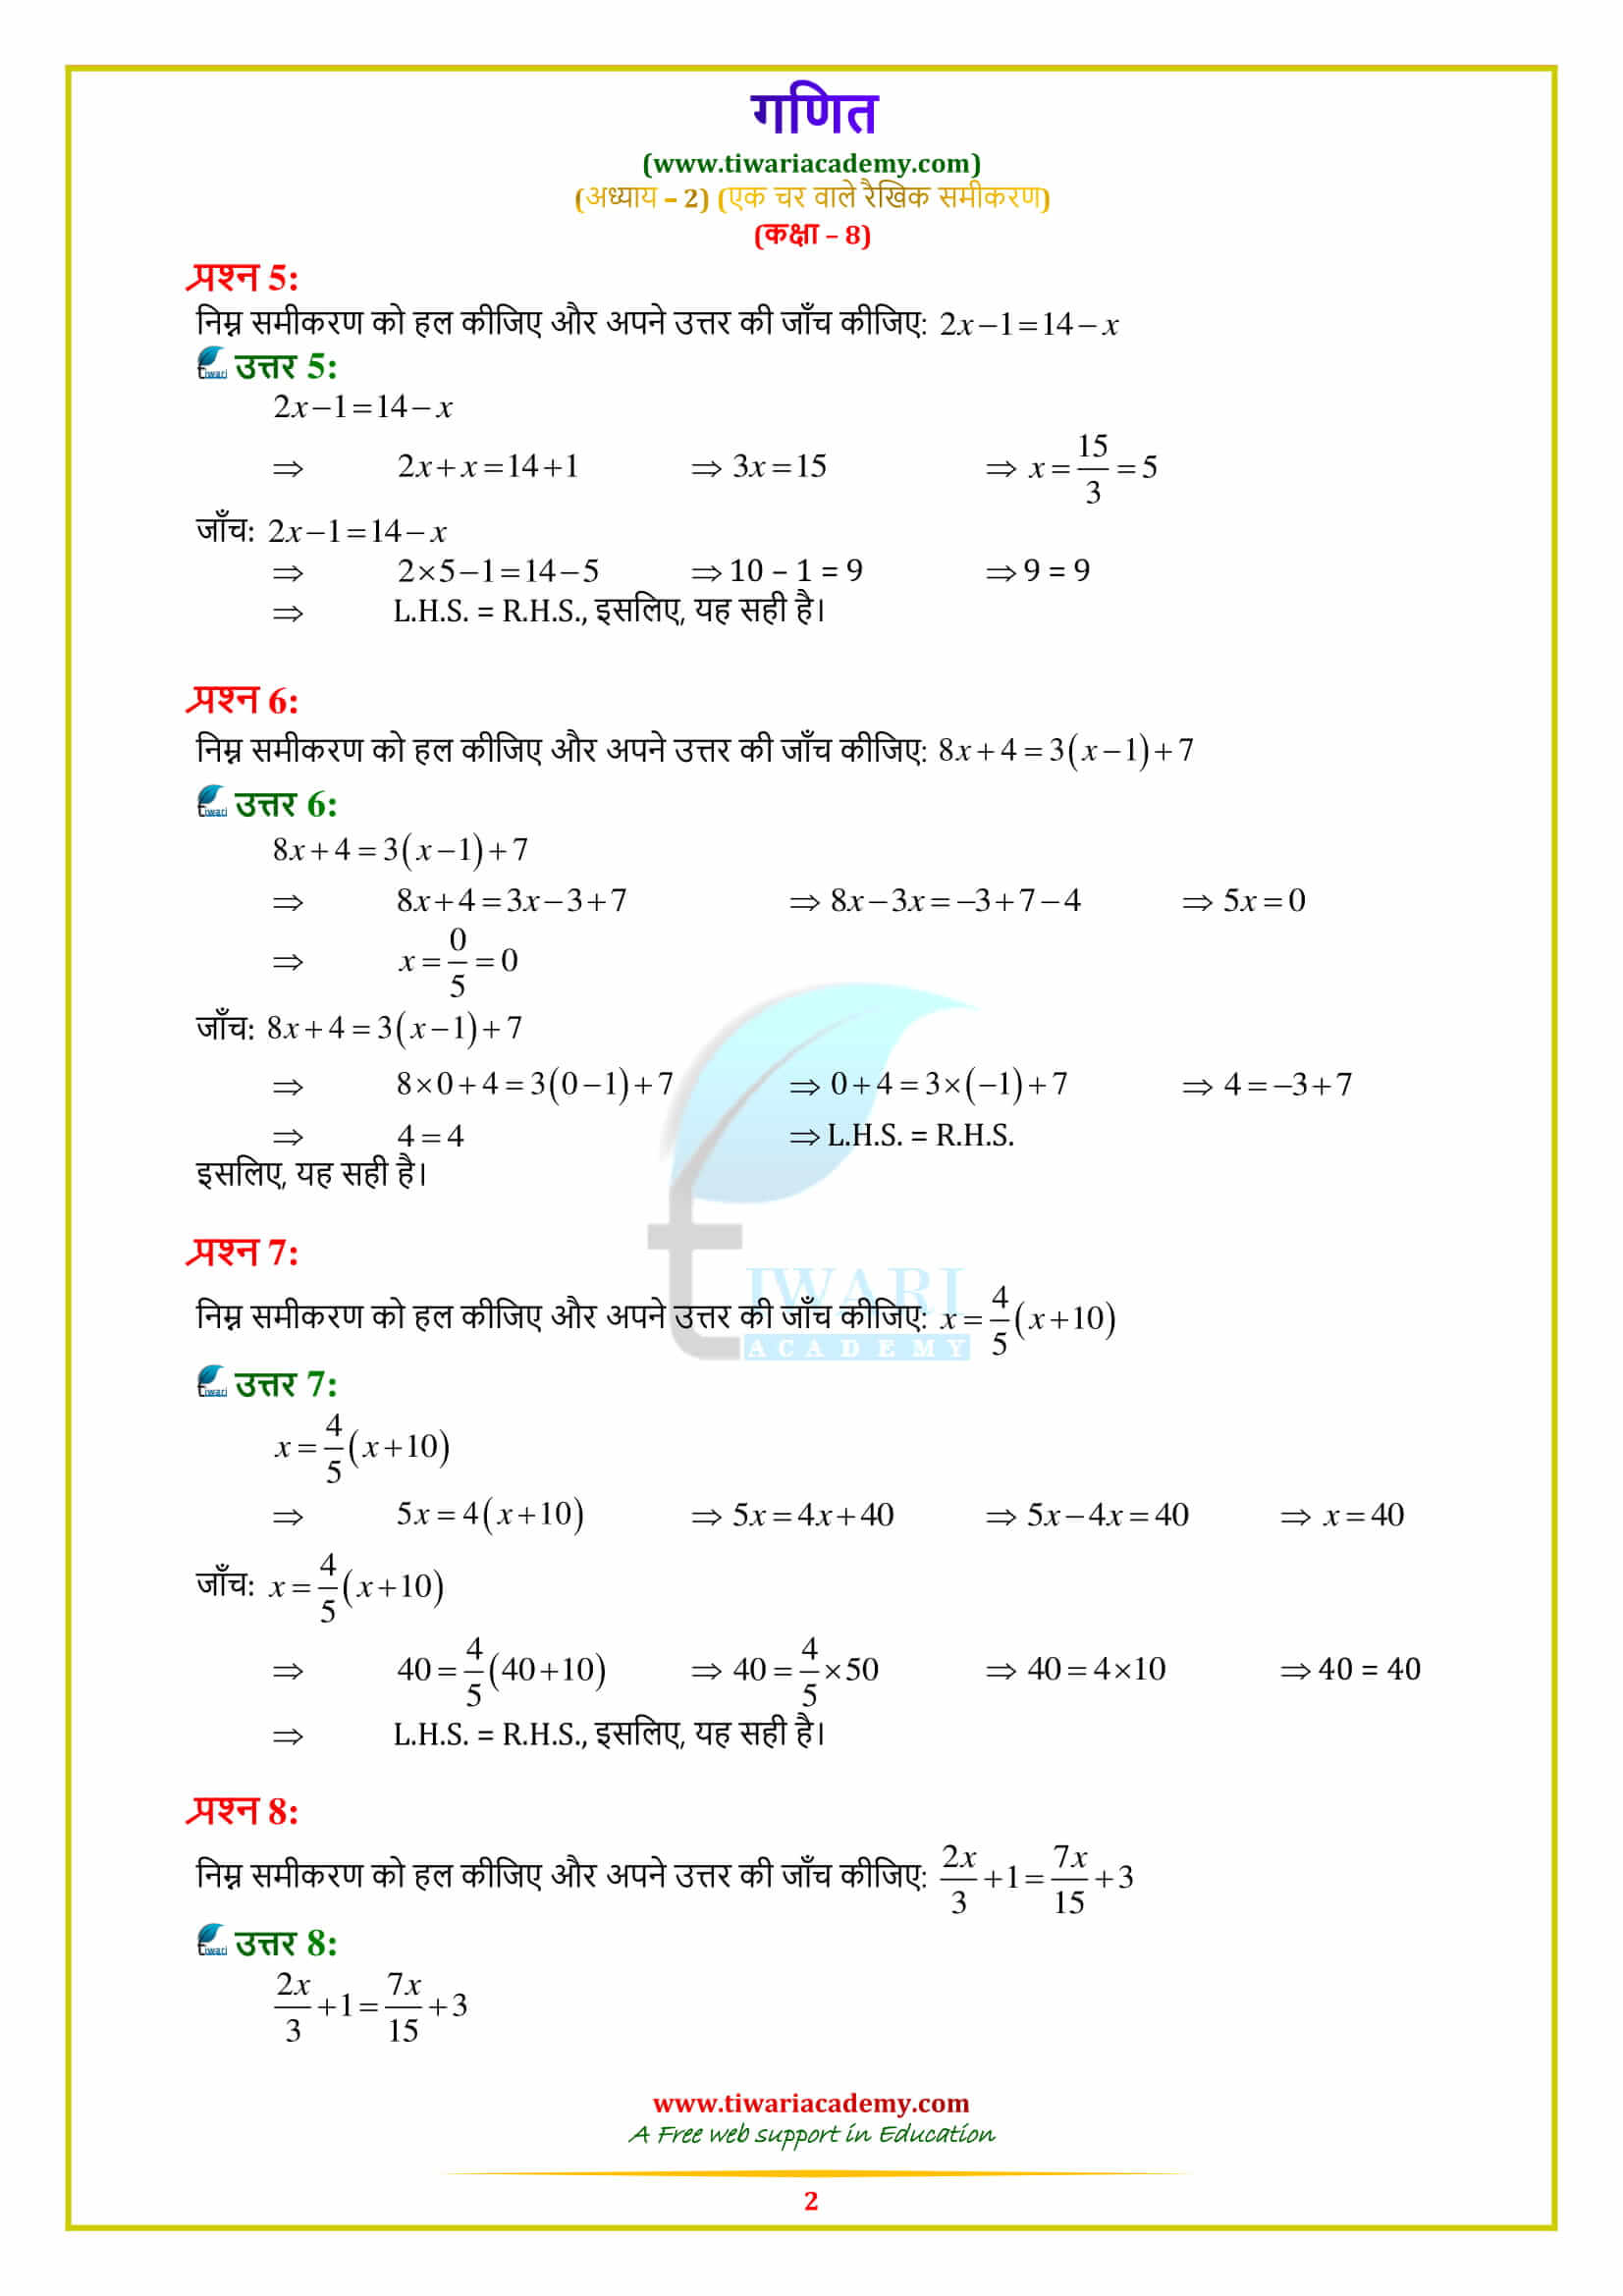 8 Maths Exercise 2.3 Solutions in hindi pdf